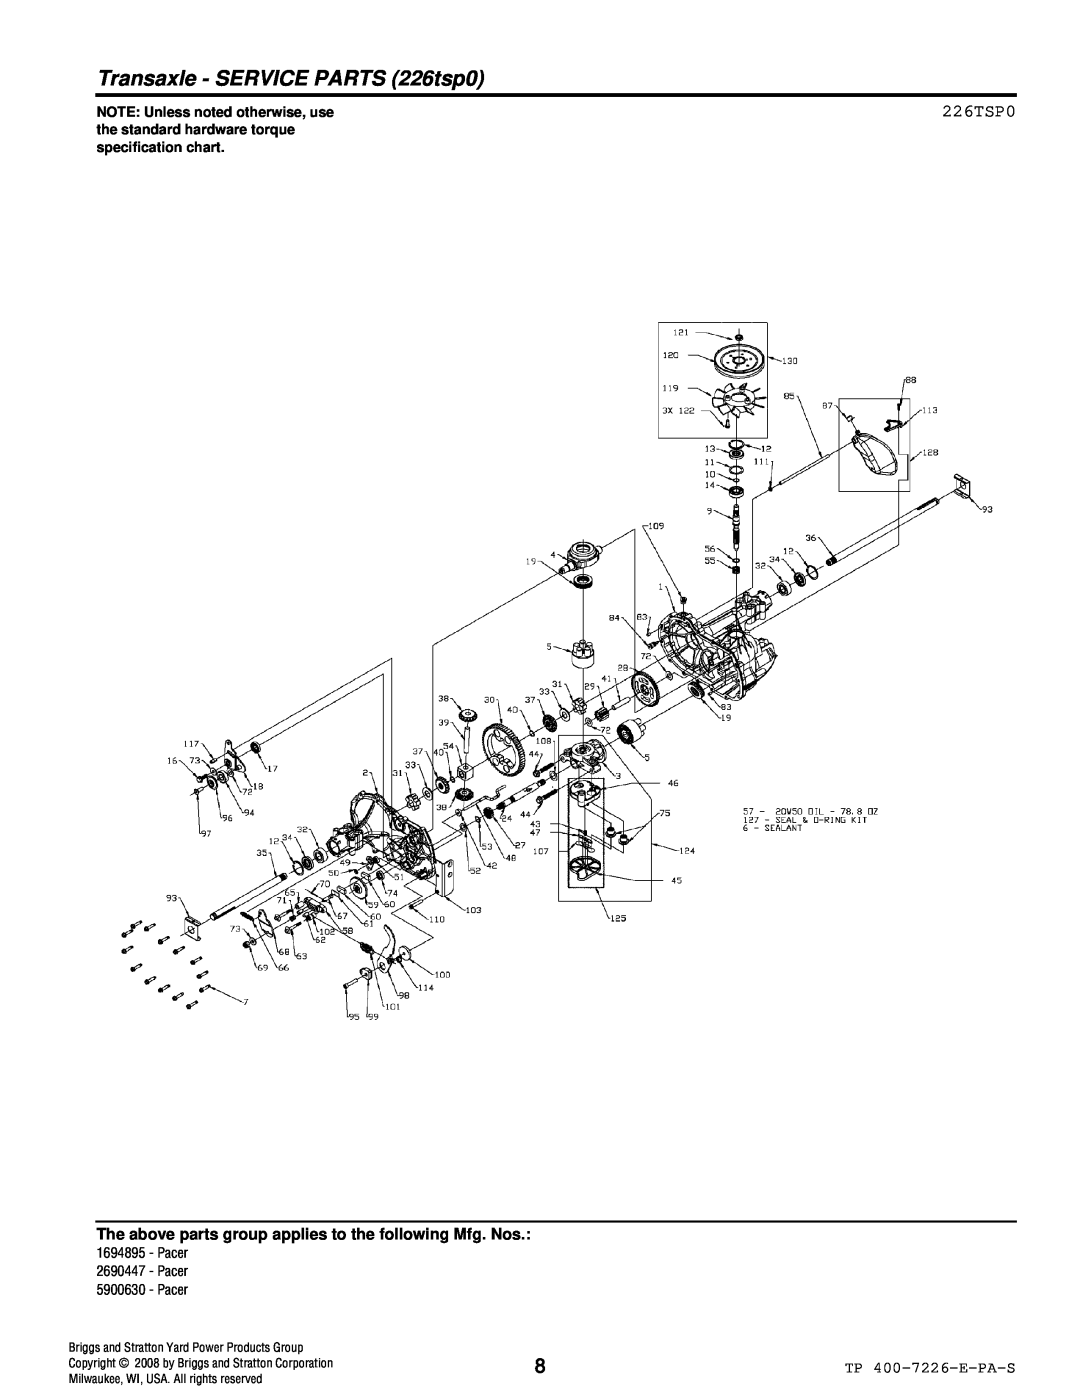 Simplicity Pacer manual Transaxle - SERVICE PARTS 226tsp0, 226TSP0, NOTE Unless noted otherwise, use 